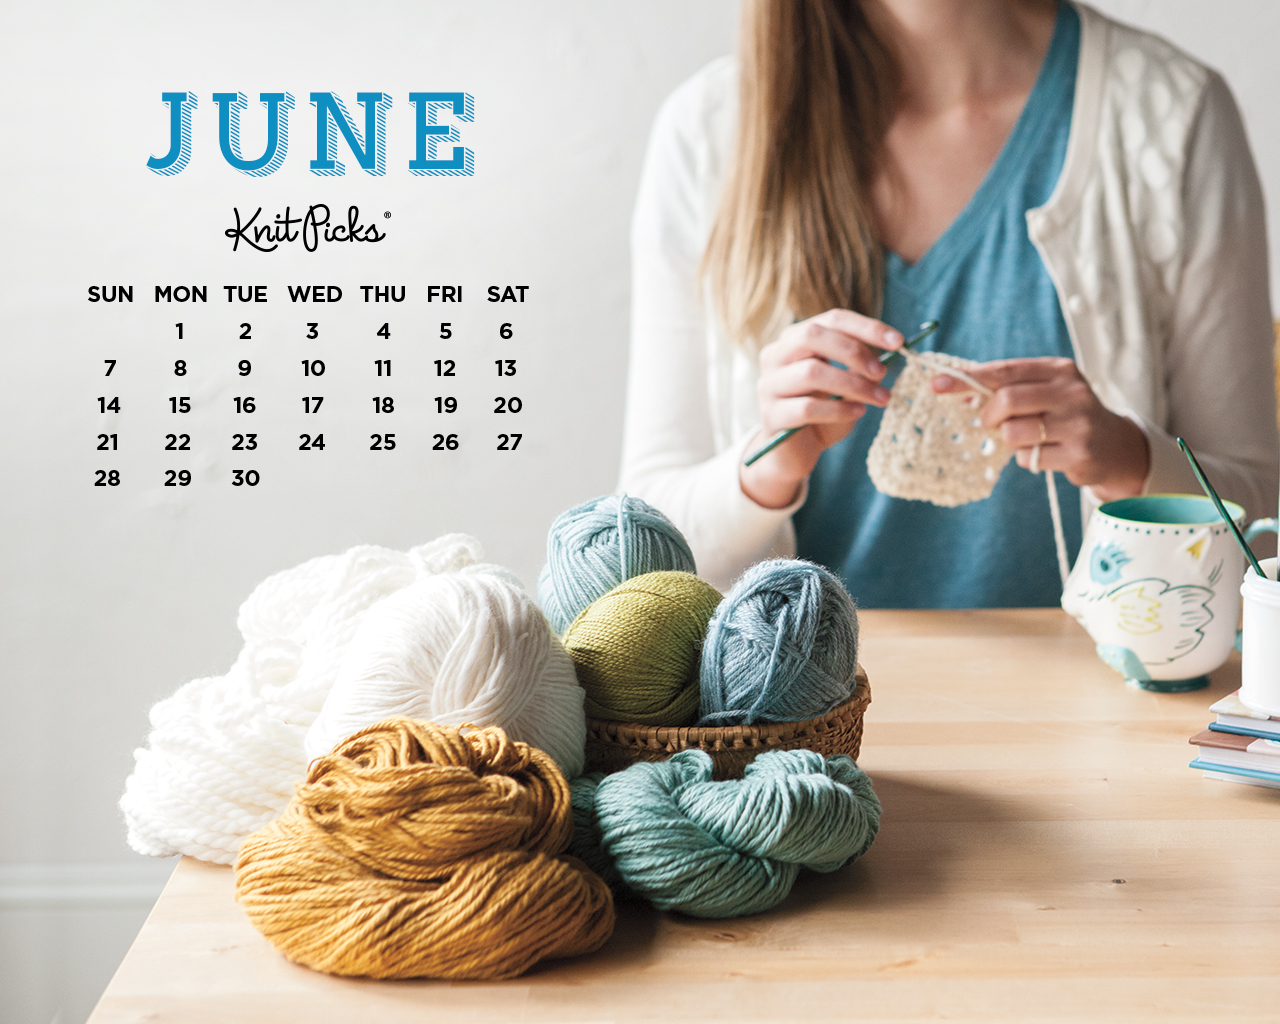 To Get The June Wallpaper Calendar Background Of Your